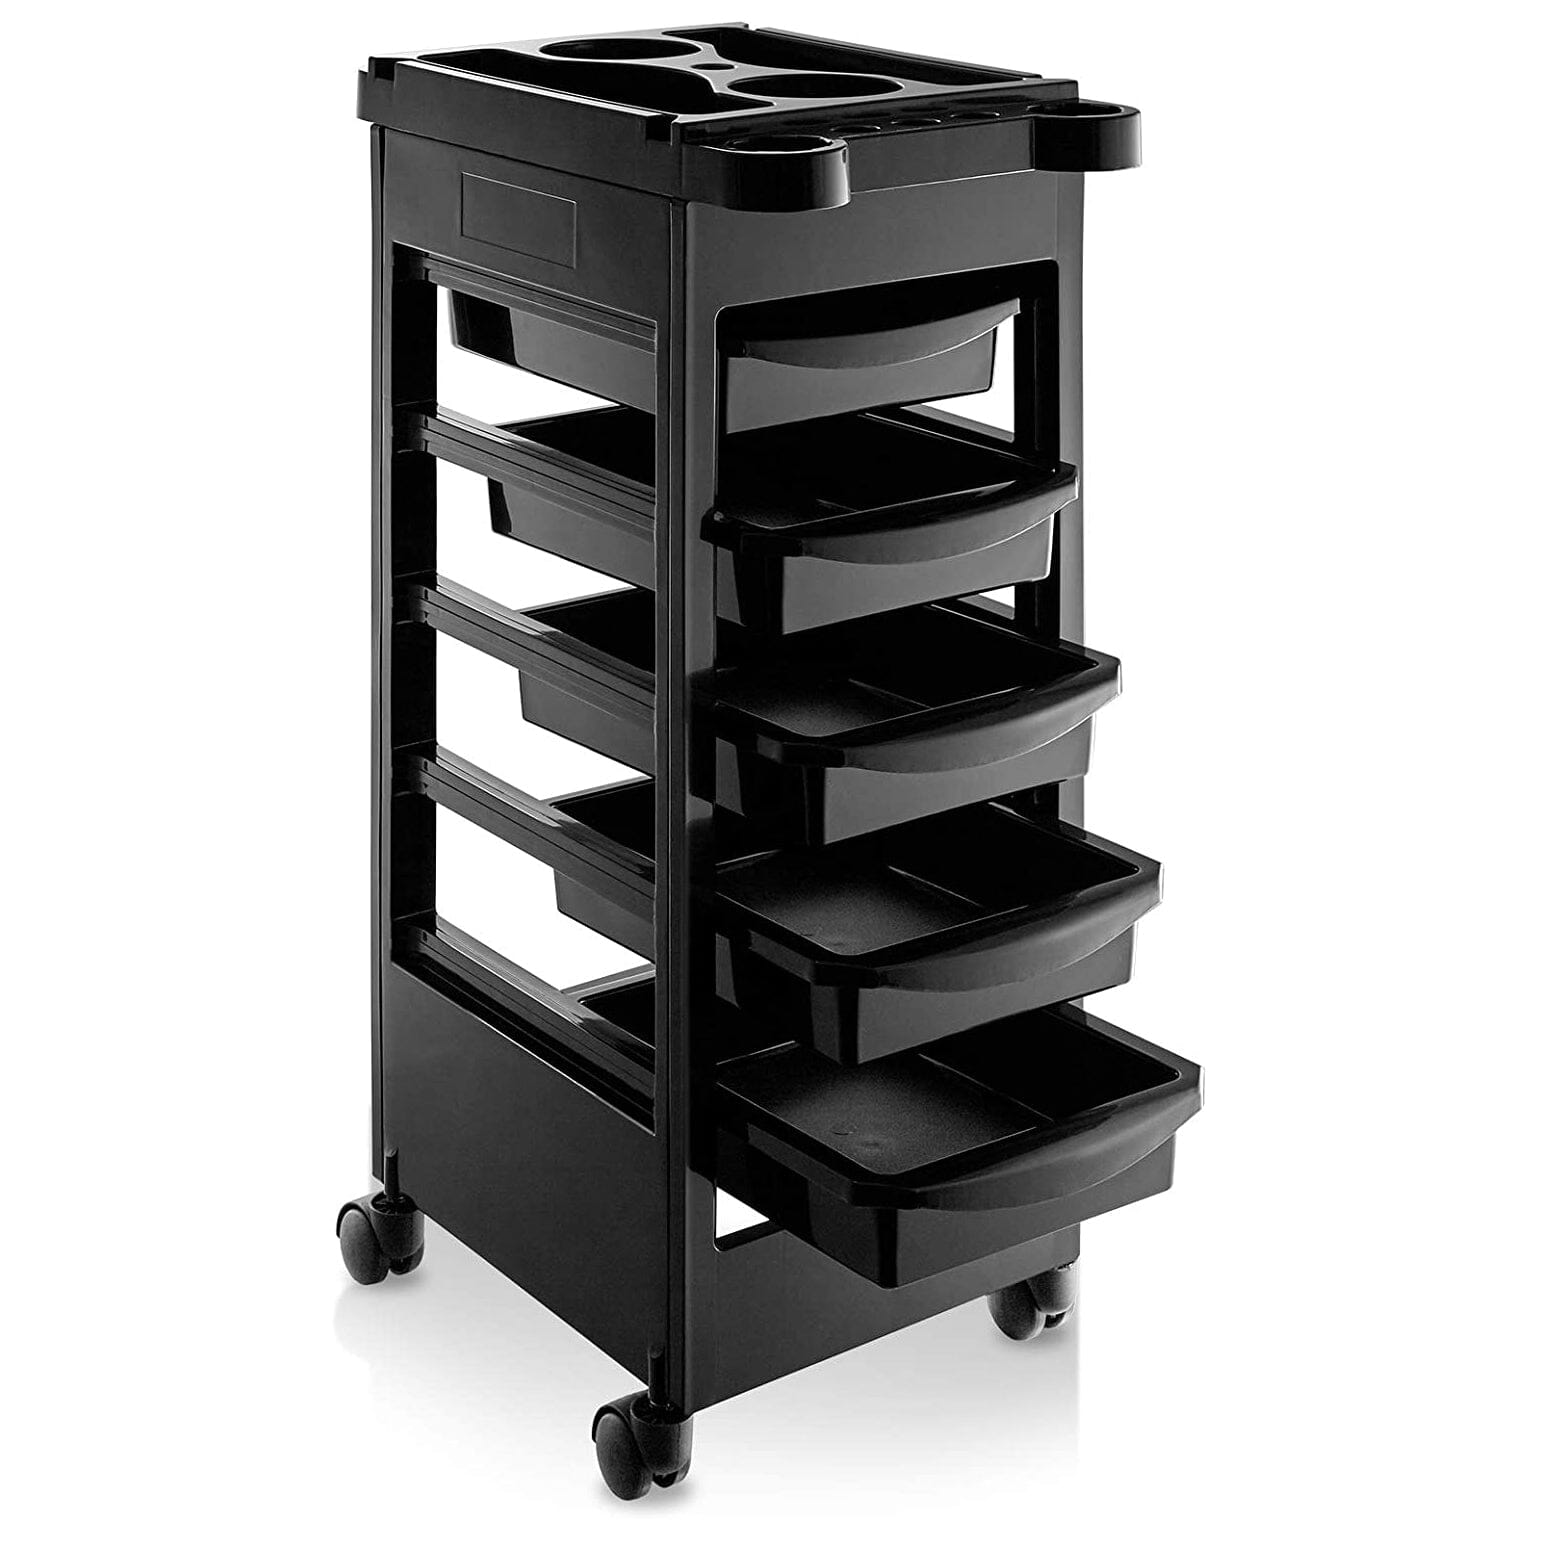 DK-38015 | Trolley Cart with 5 Drawers TROLLEY SSW 